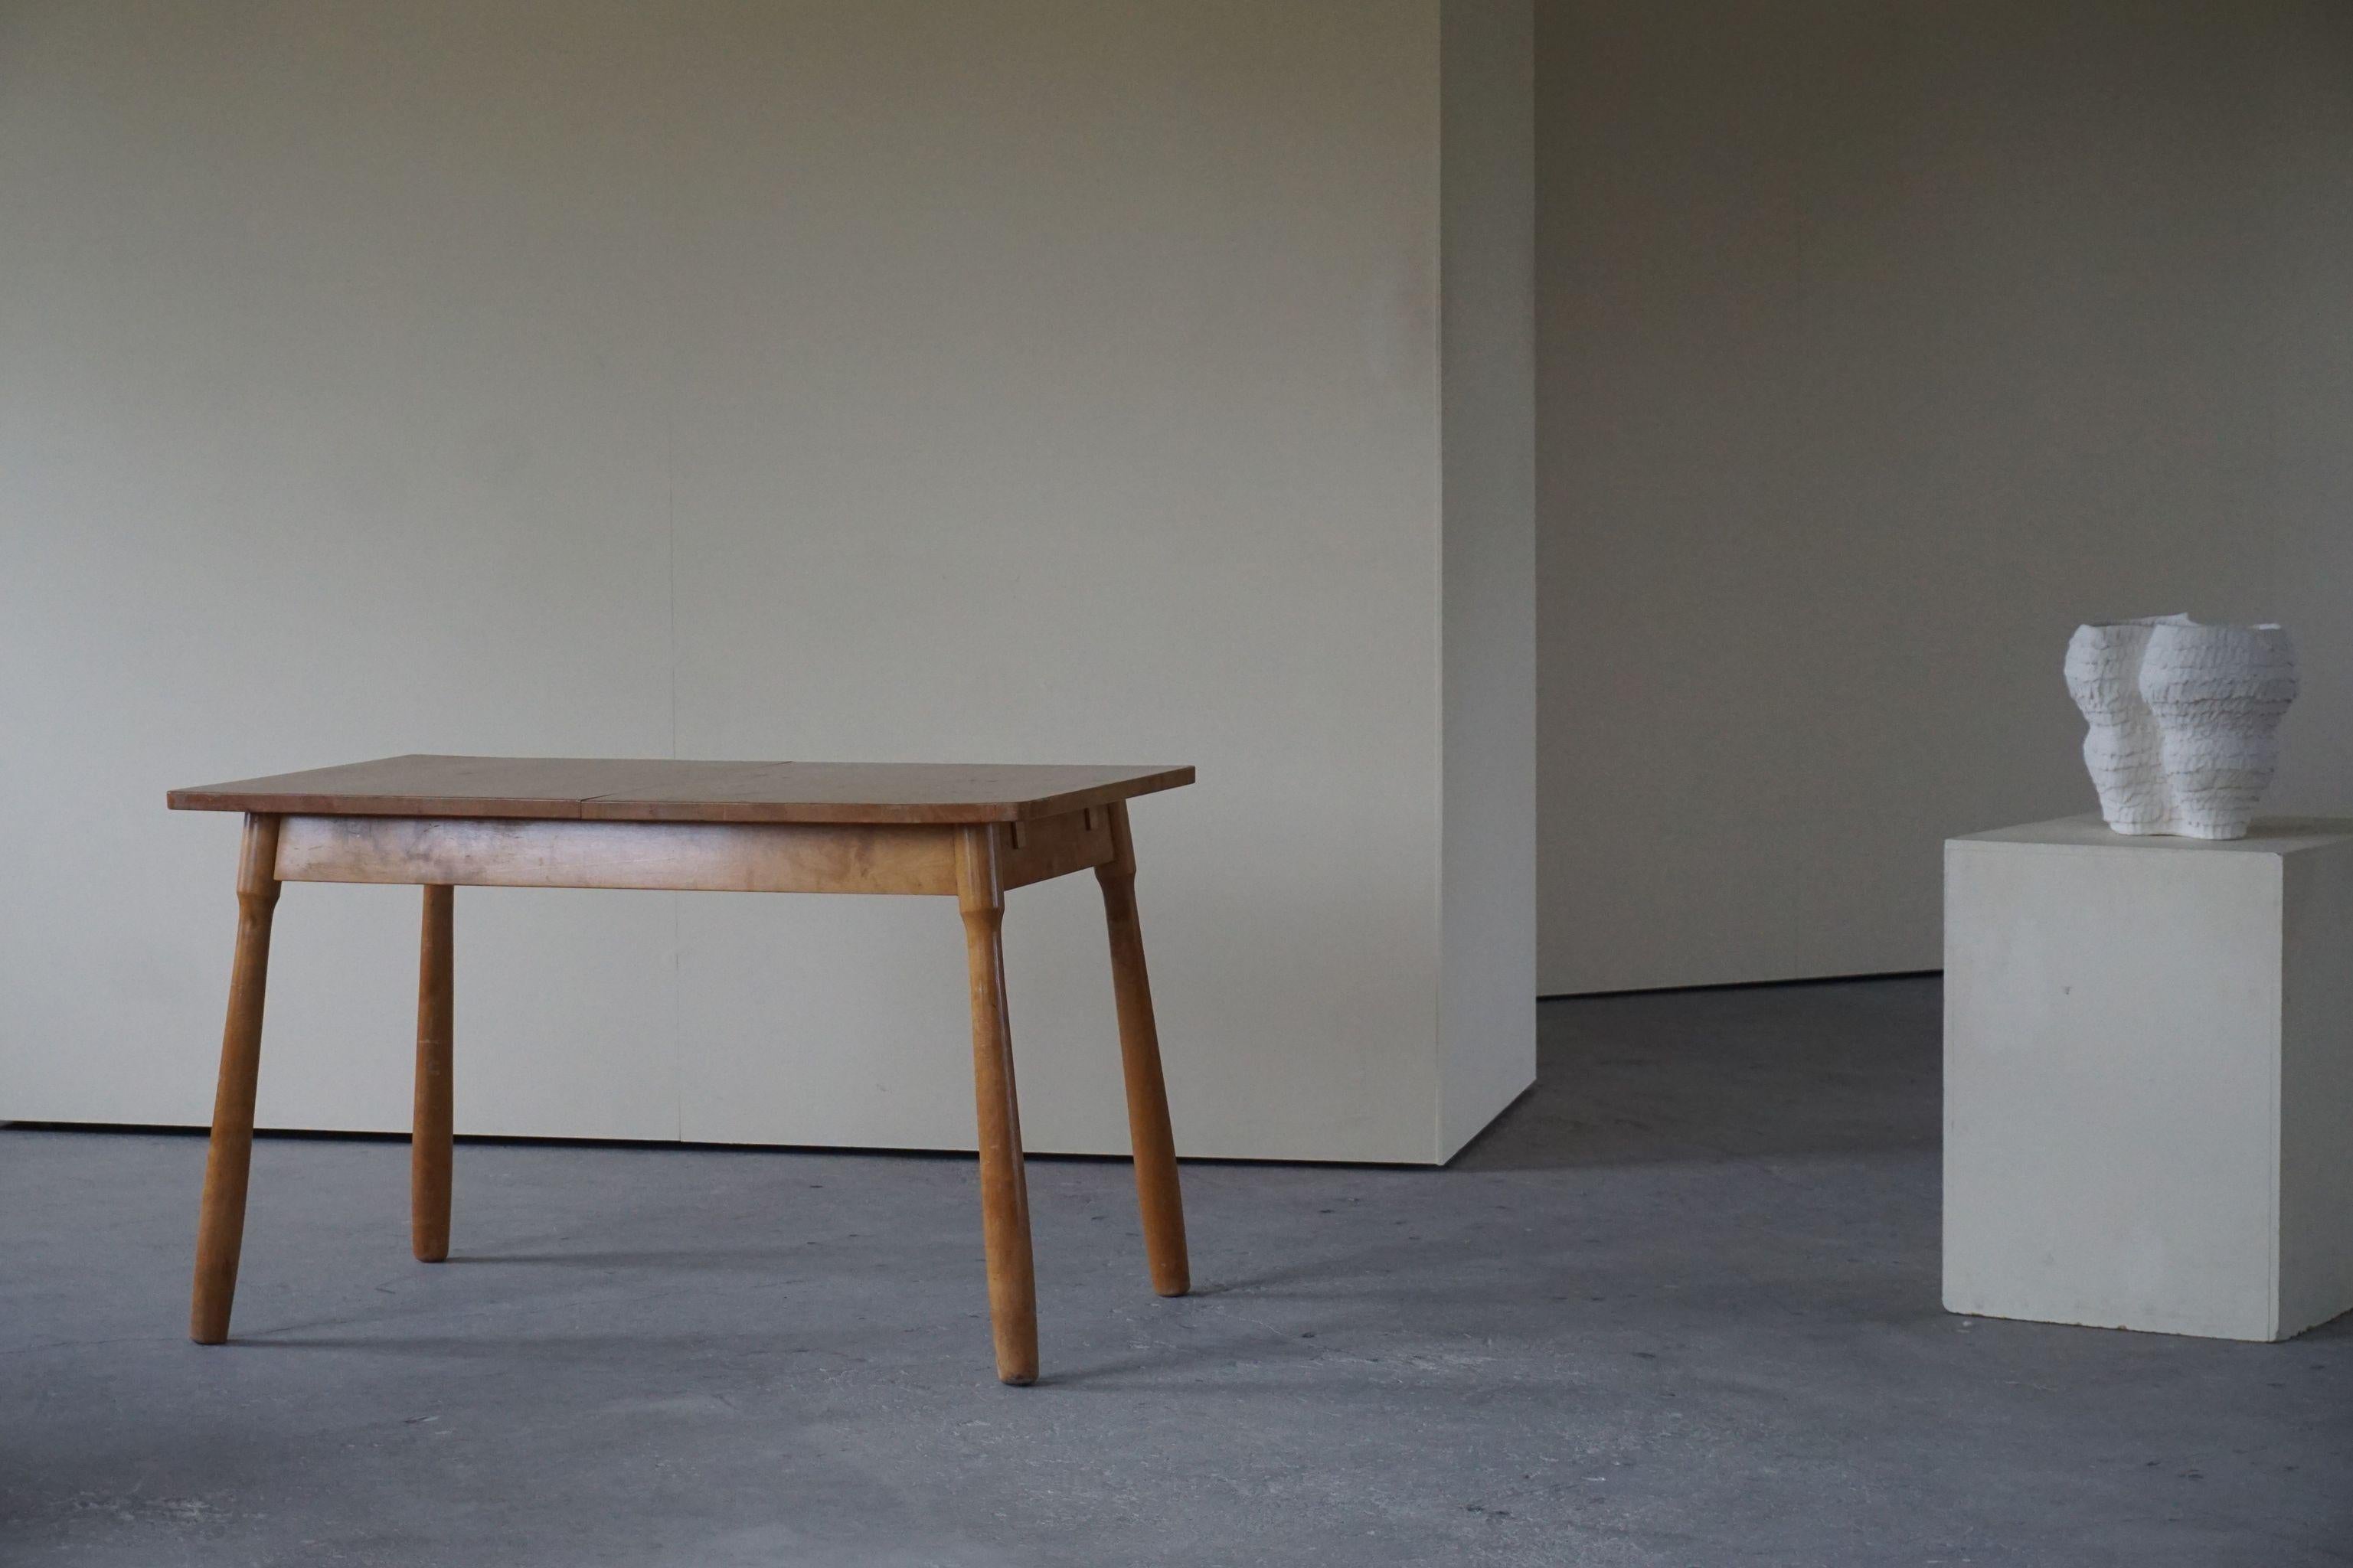 Mid-20th Century Danish Modern Desk / Dining Table in Birch Attributed to Philip Arctander, 1940s